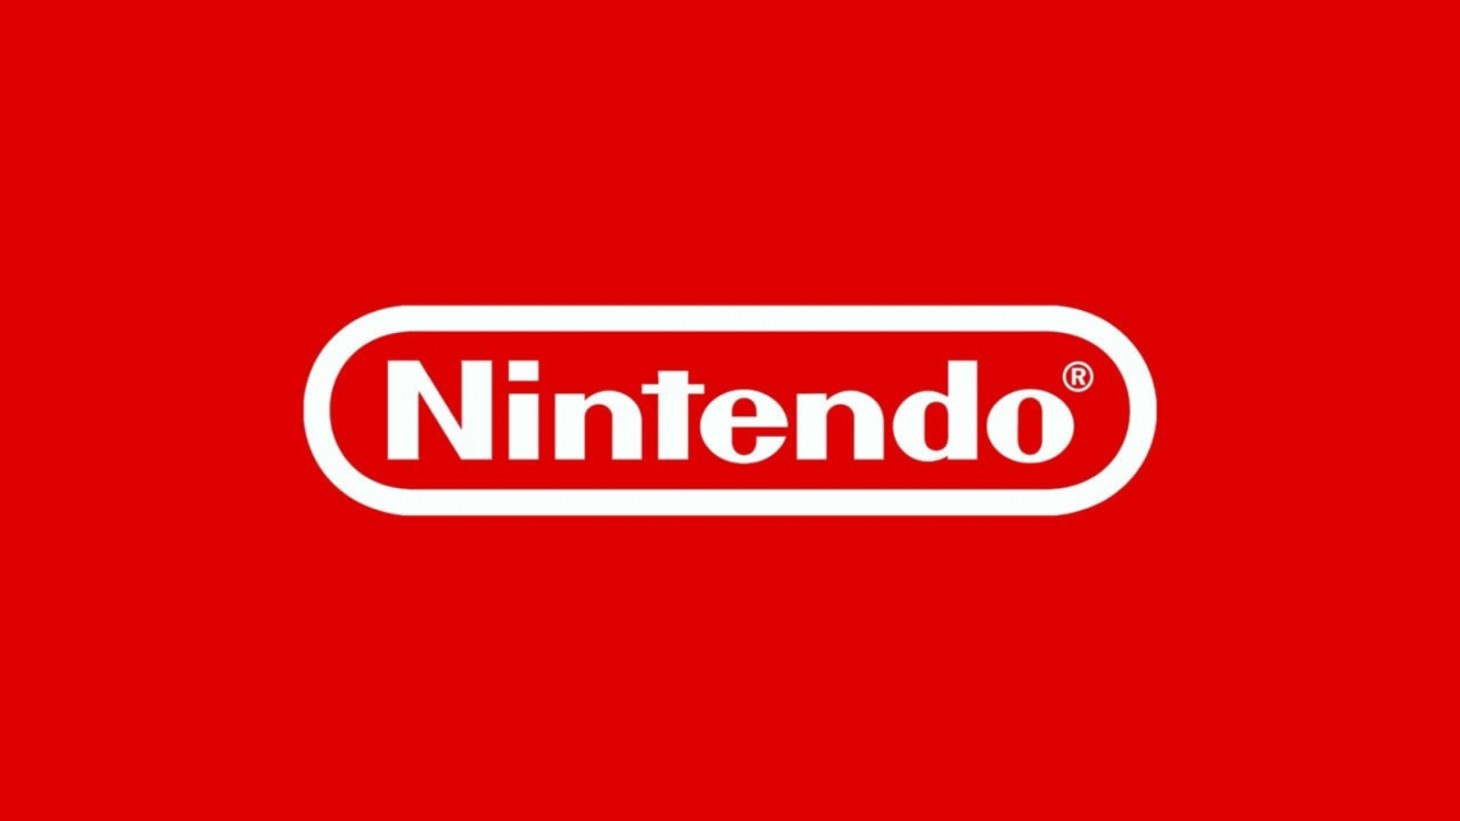 Nintendo Direct September 2023: How to Watch, Leaks, and Predictions